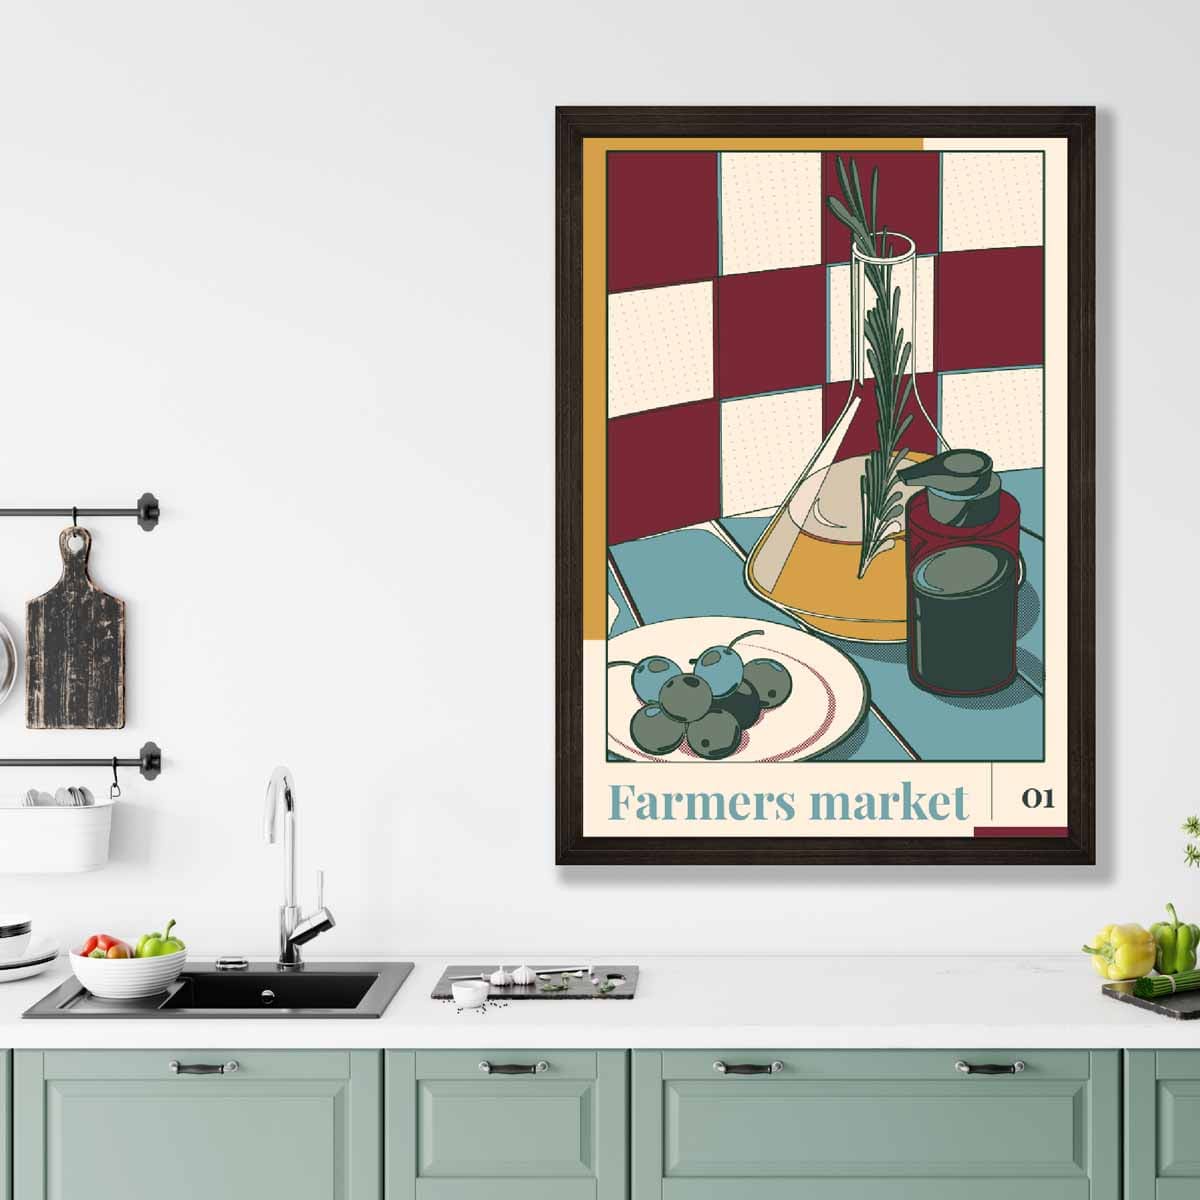 Farmers Market Poster No 1 in Damson Red and Blue